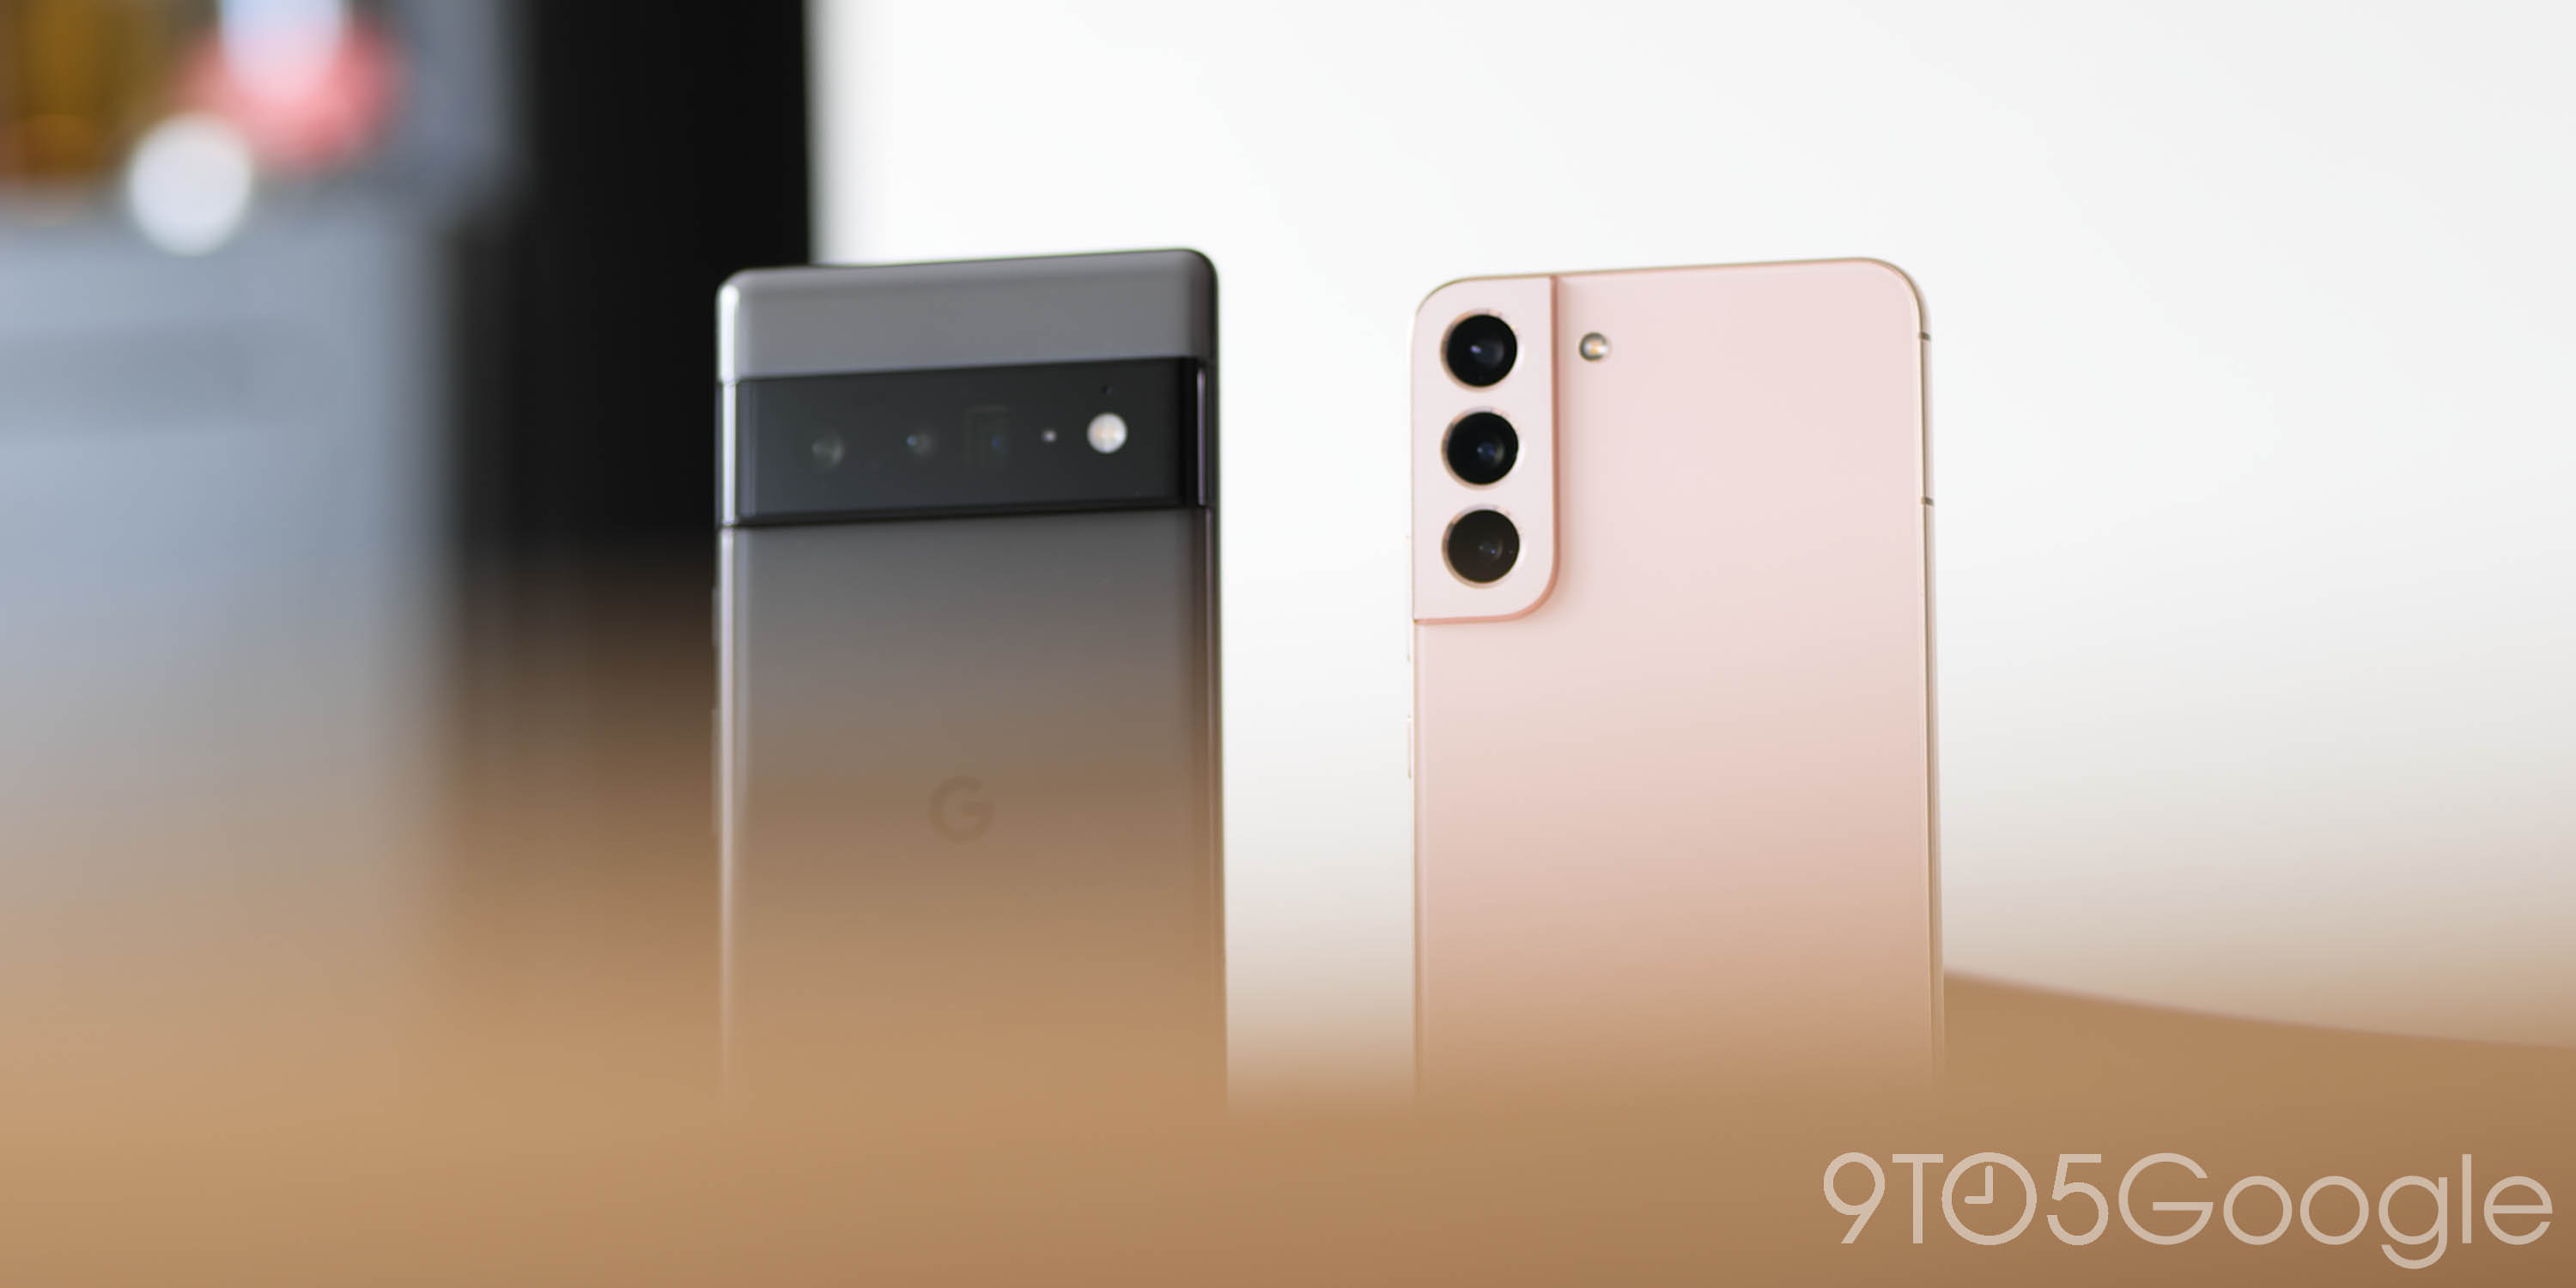 Google Pixel 6 Pro in Stormy Black with Samsung Galaxy S22+ in Pink Gold